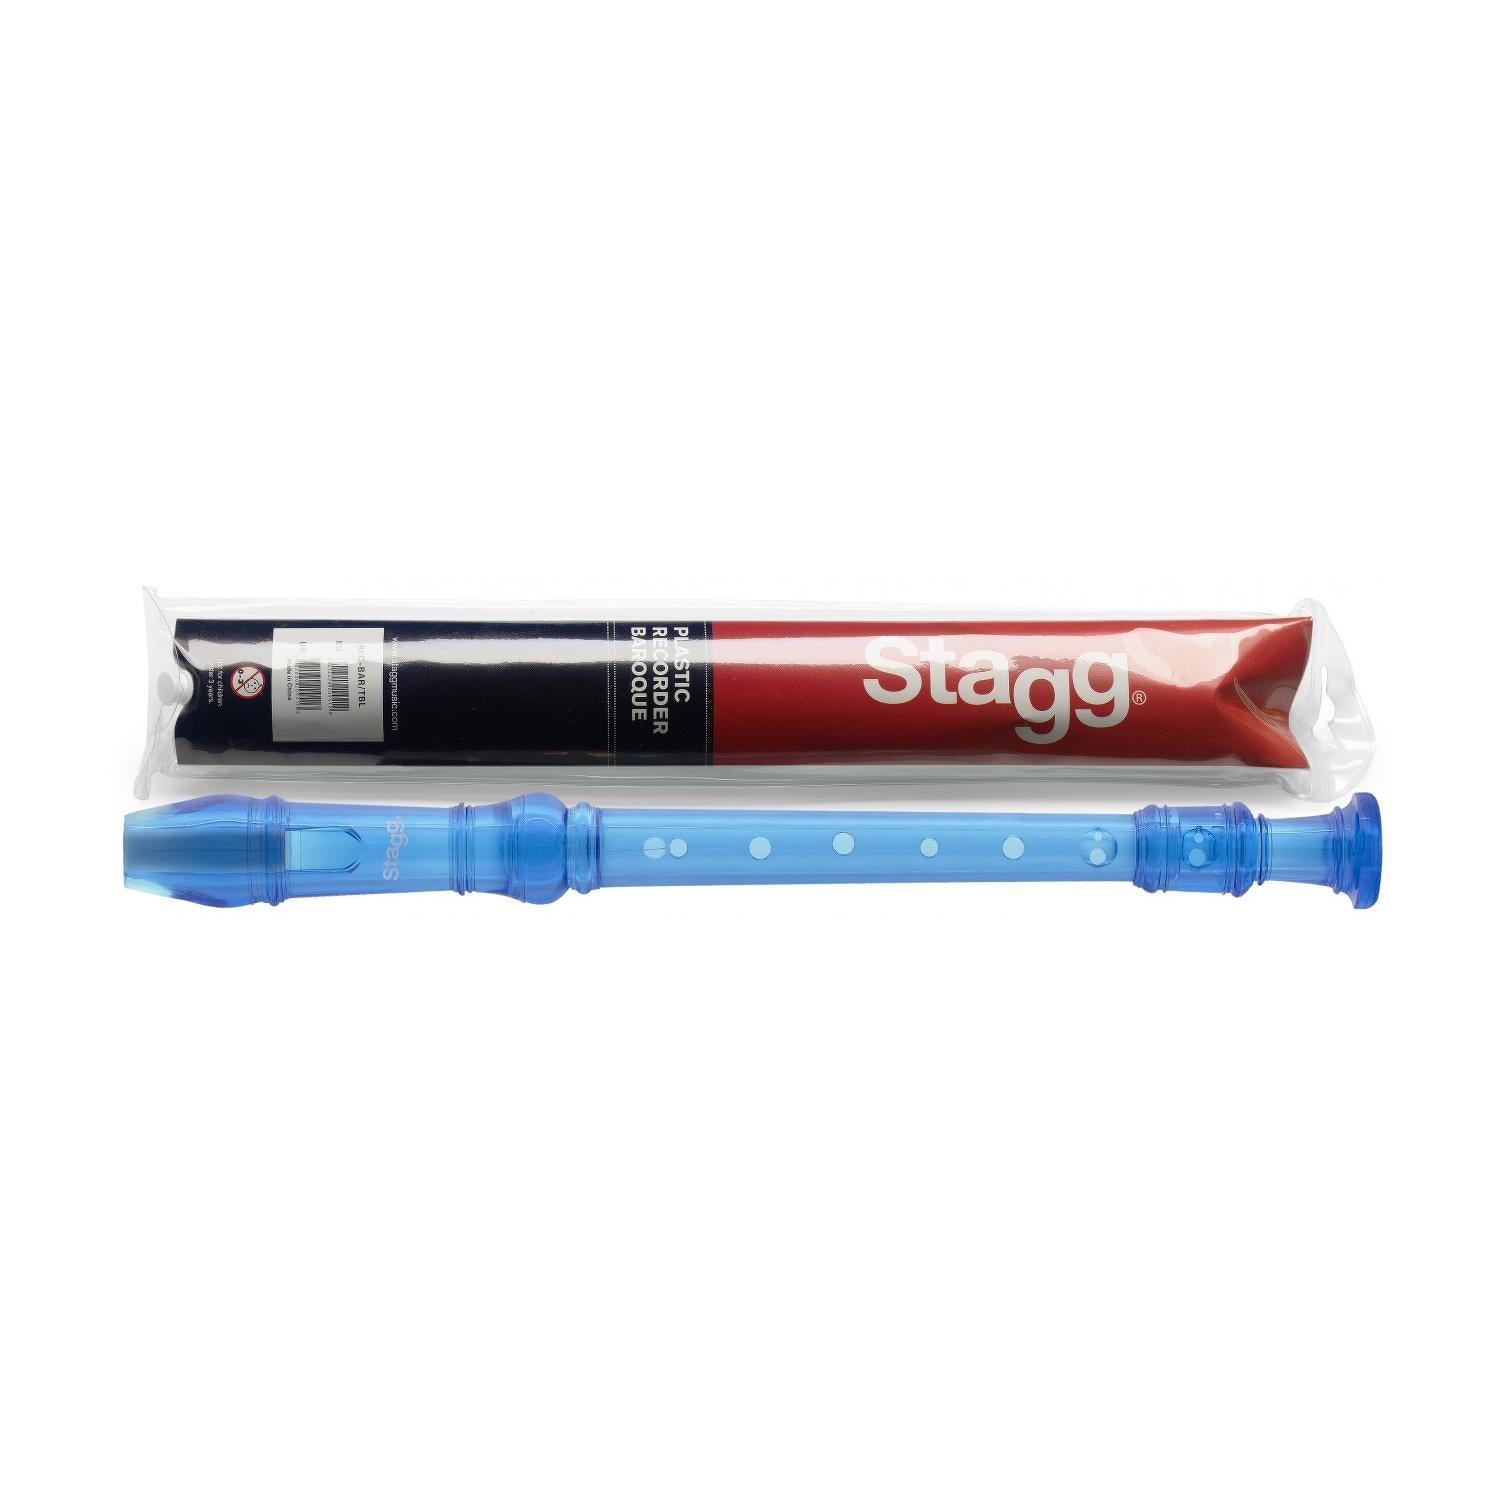 Stagg REC-BAR/TBL Soprano Recorder with Baroque Fingering Blue - DY Pro Audio